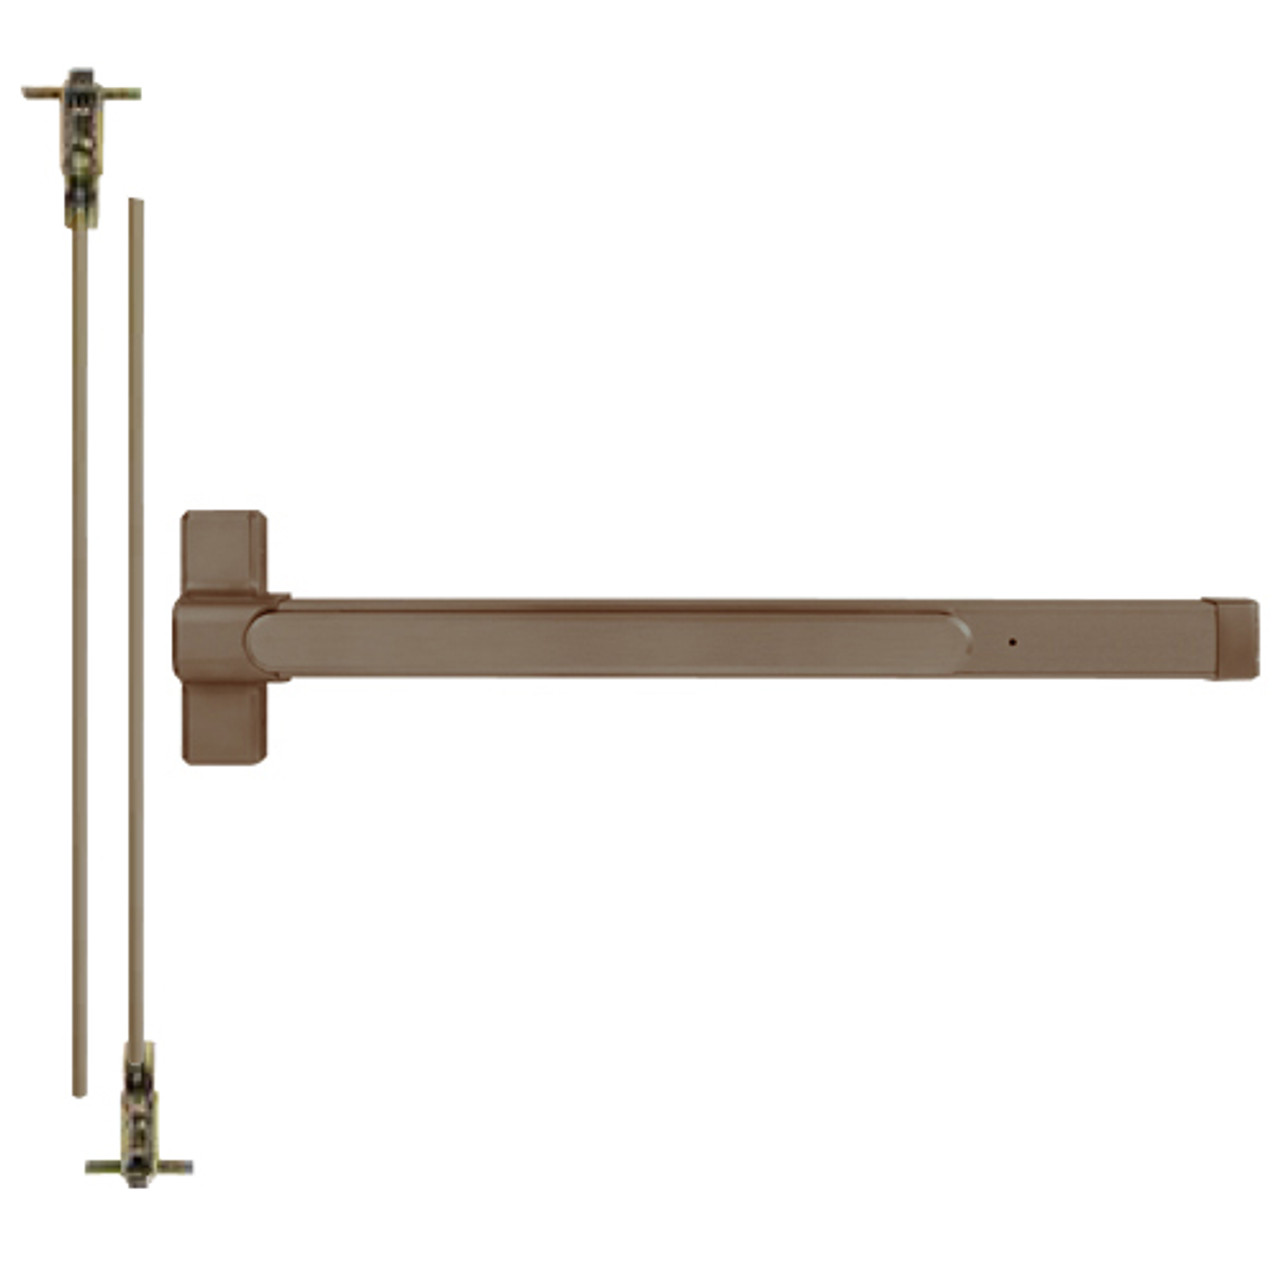 QED125-36-7-313AN-LC Stanley QED100 Series Heavy Duty Concealed Vertical Rod Cylinder Dog Exit Device in Anodized Duranodic Bronze Finish